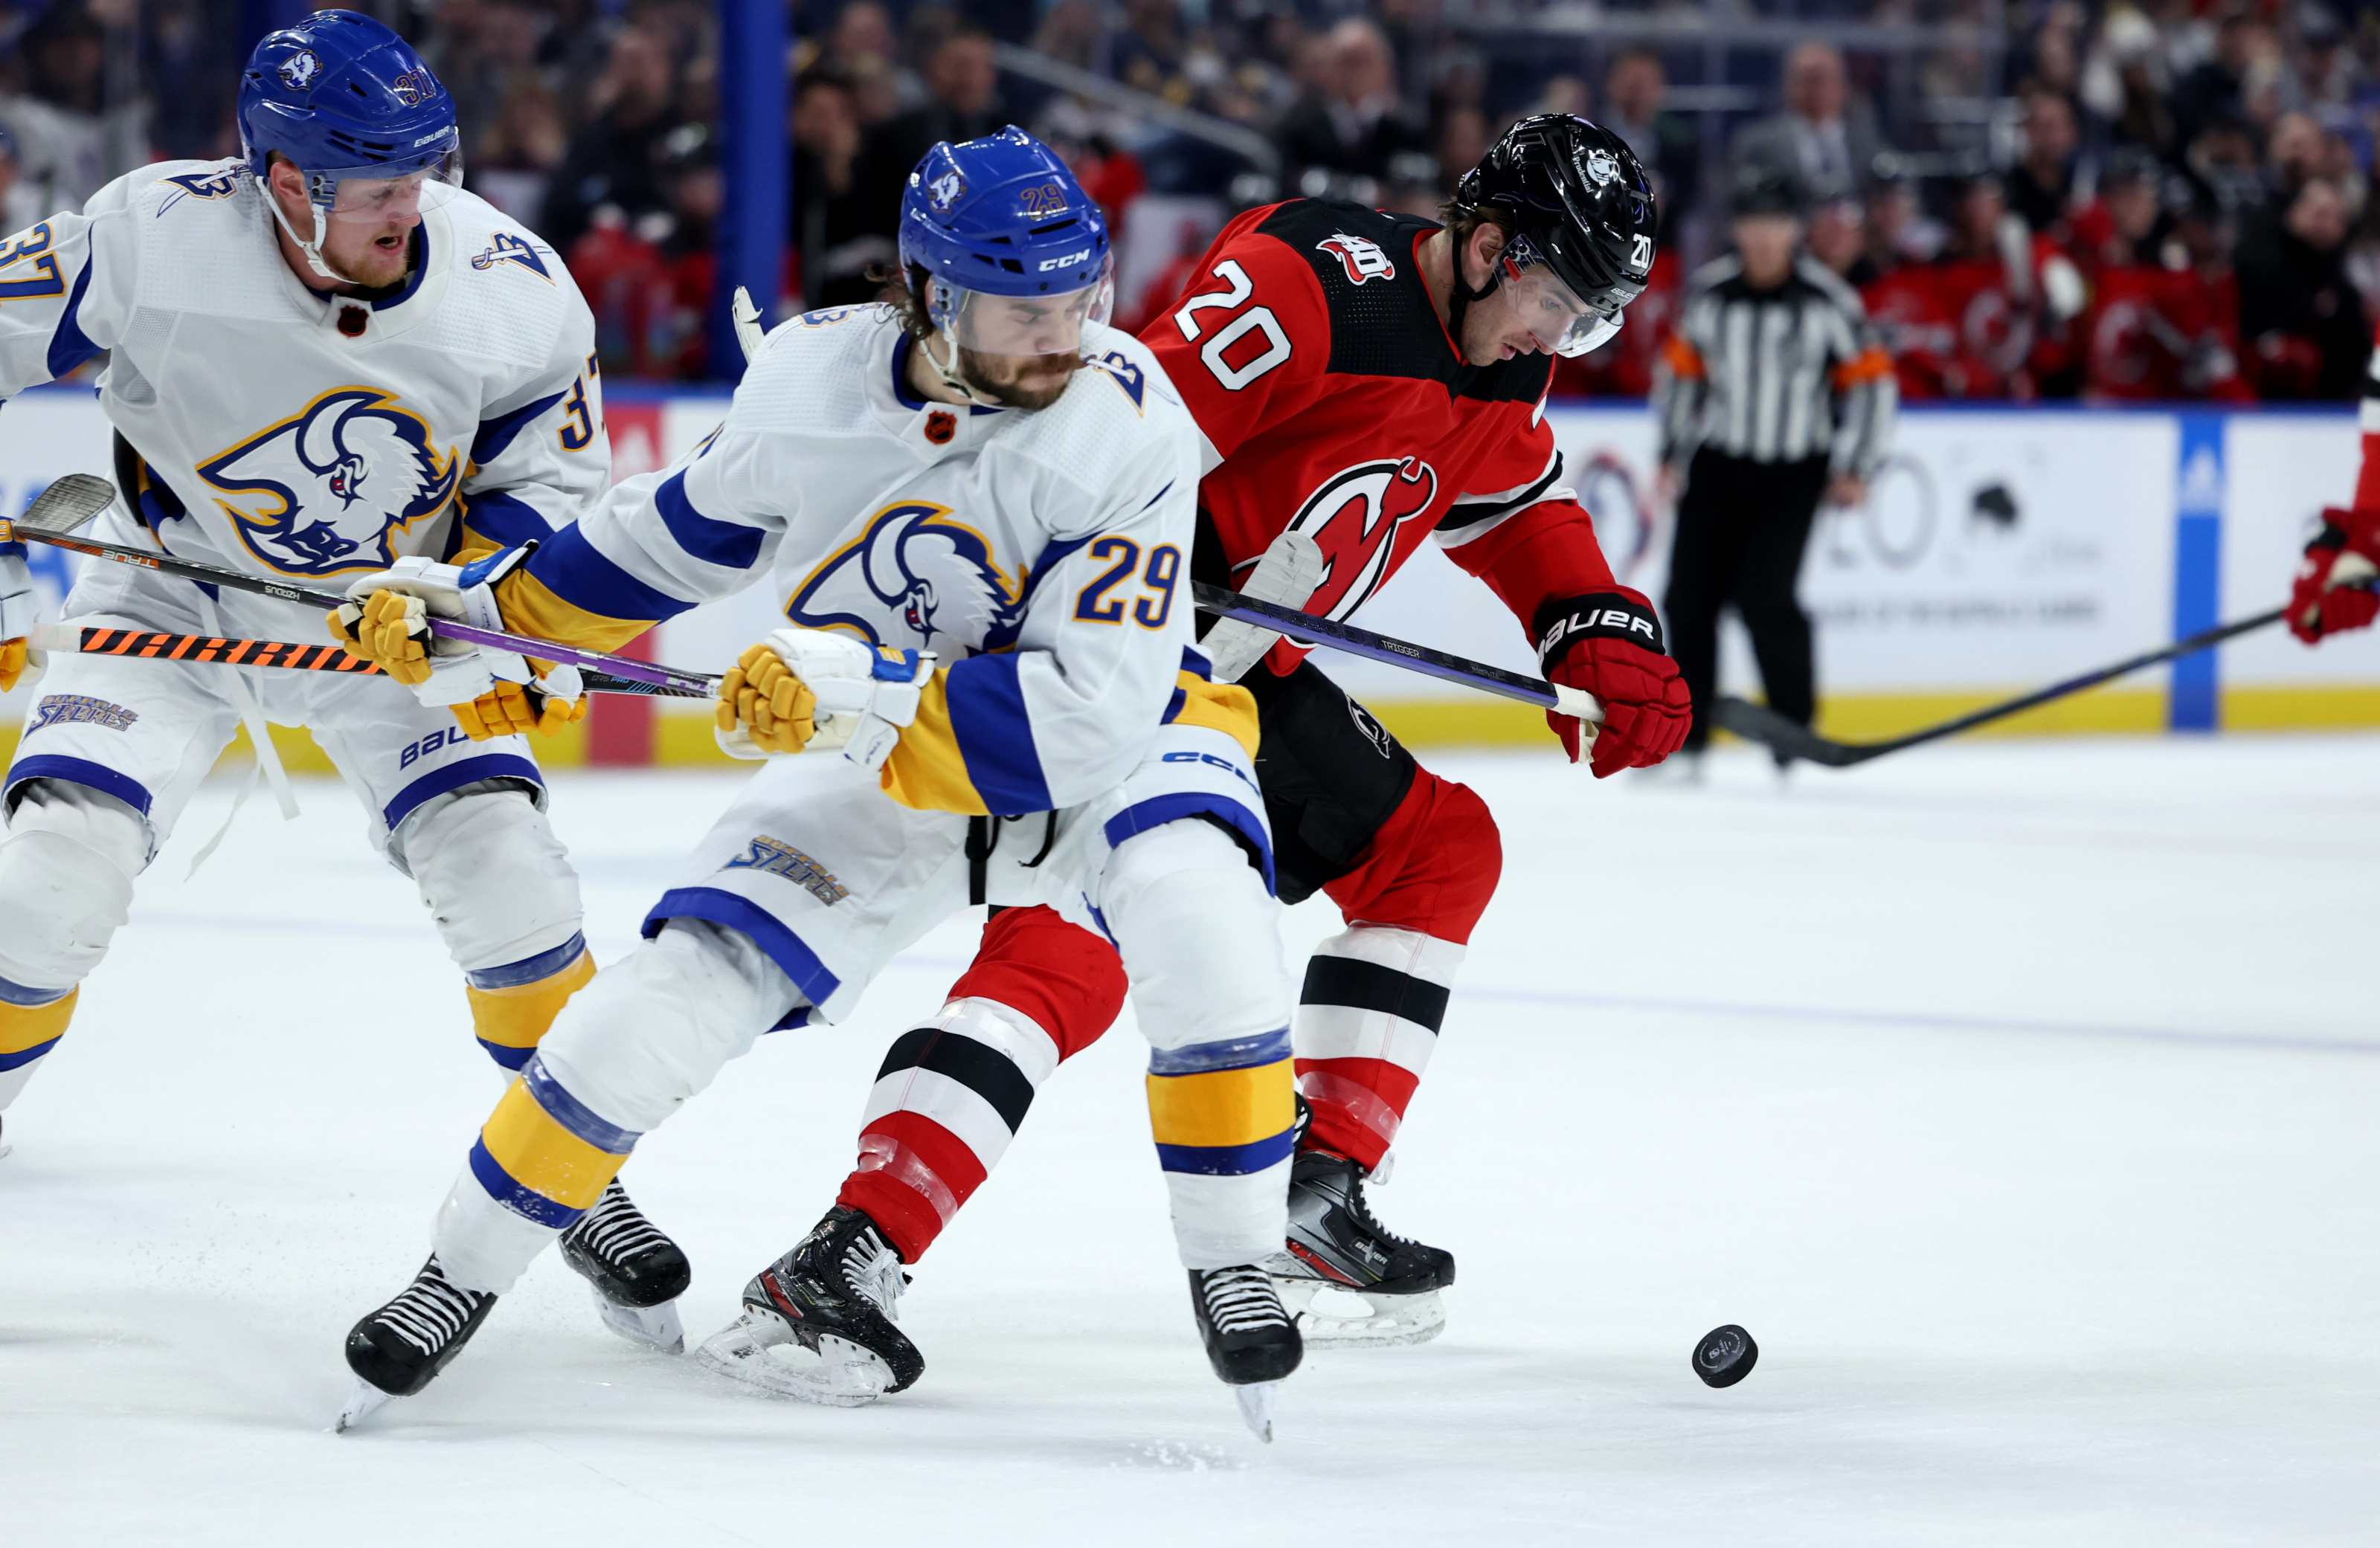 Takeaways from NJ Devils' Game 1 loss to Tampa Bay LIghtning